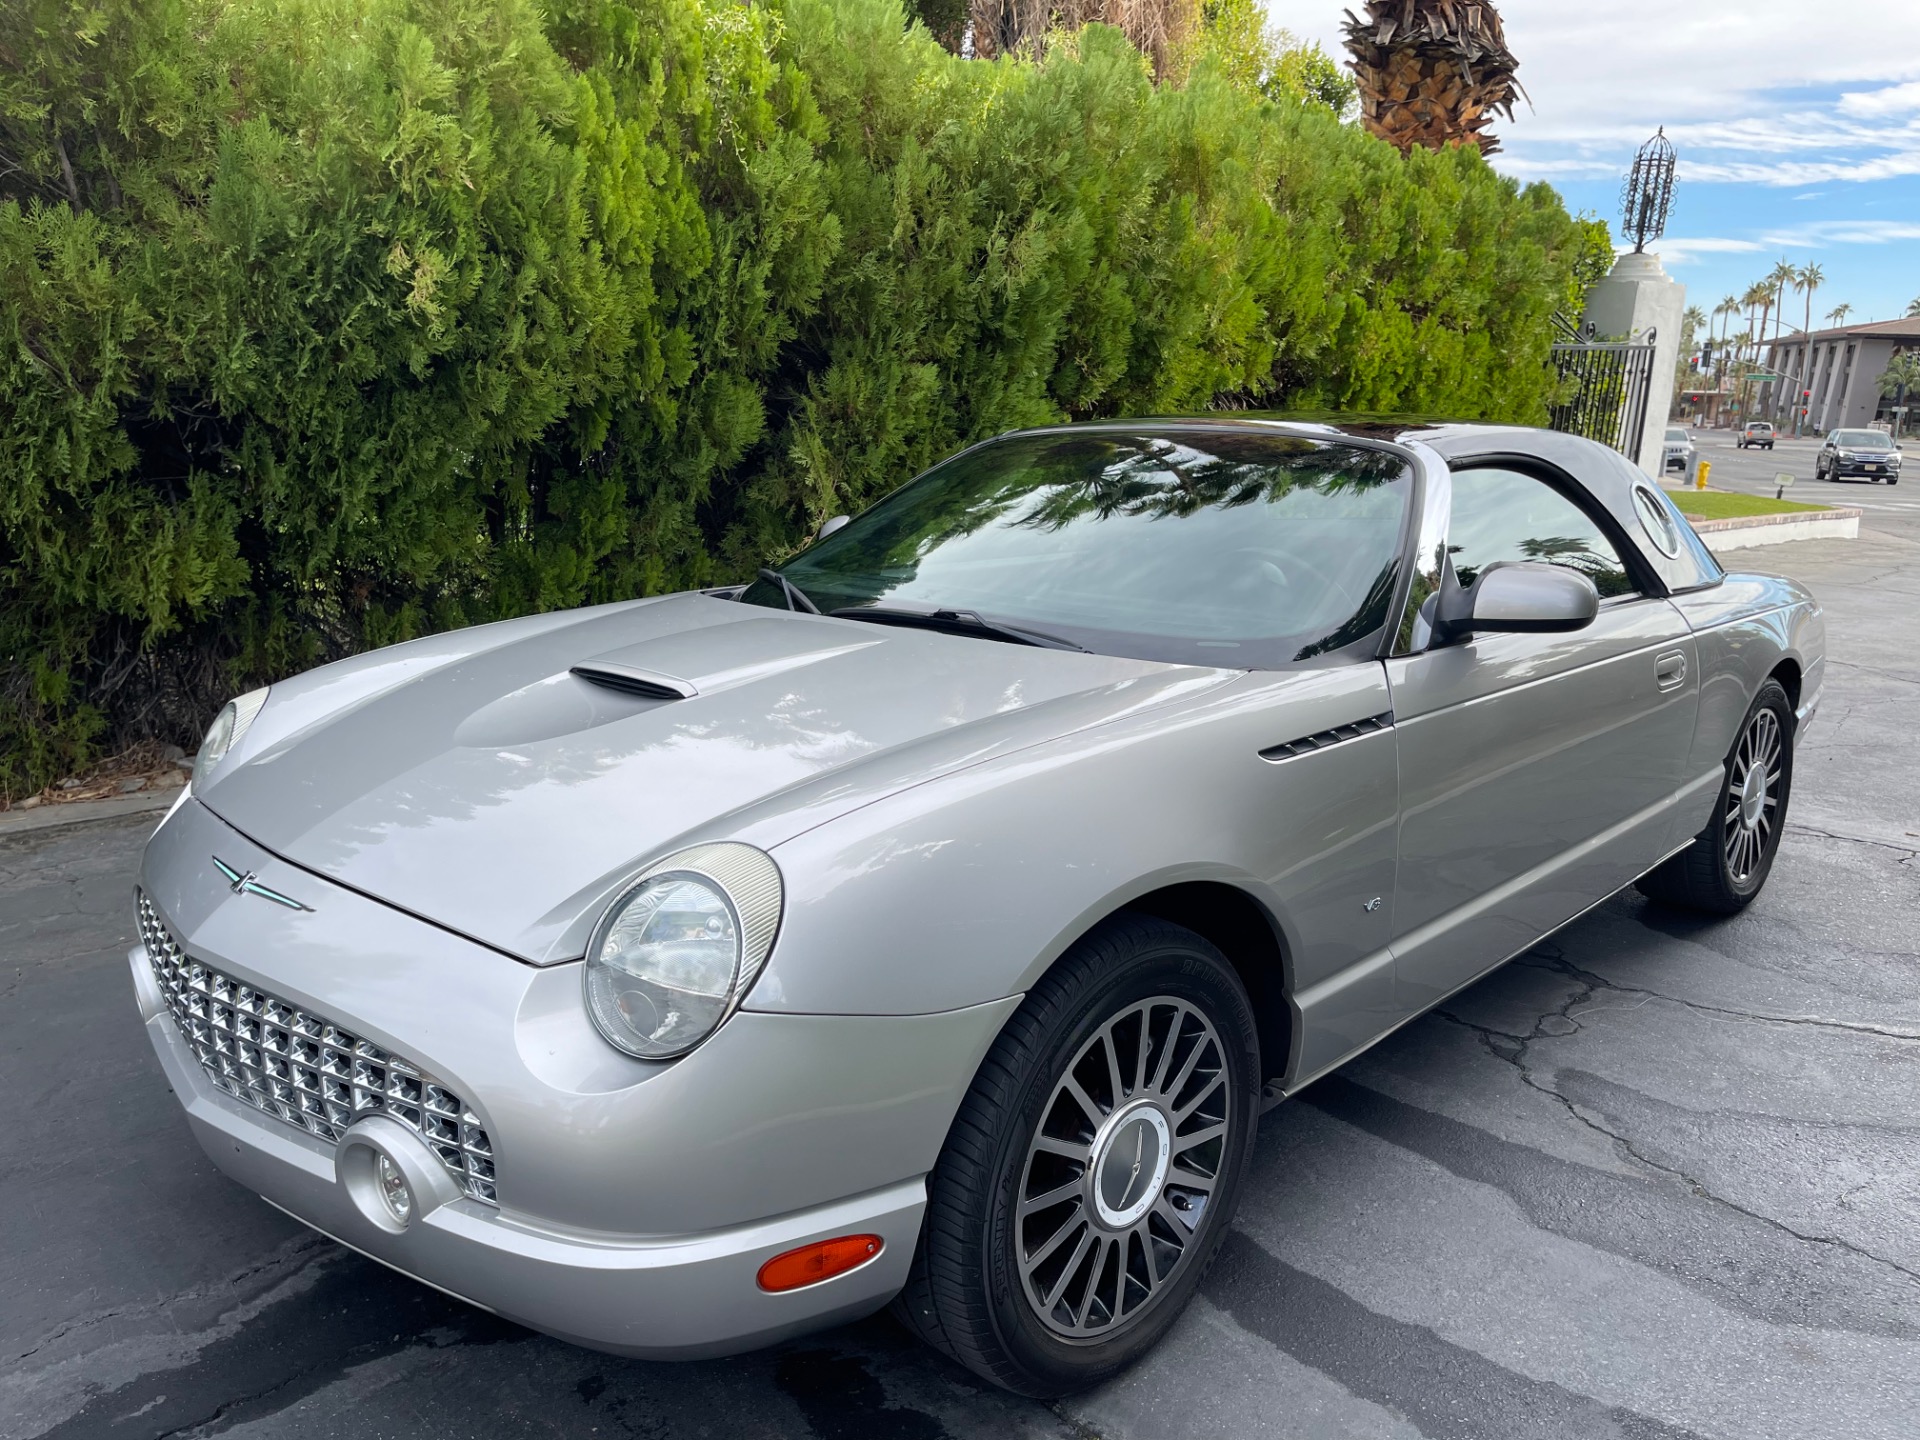 Used-2004-Ford-Thunderbird-Deluxe